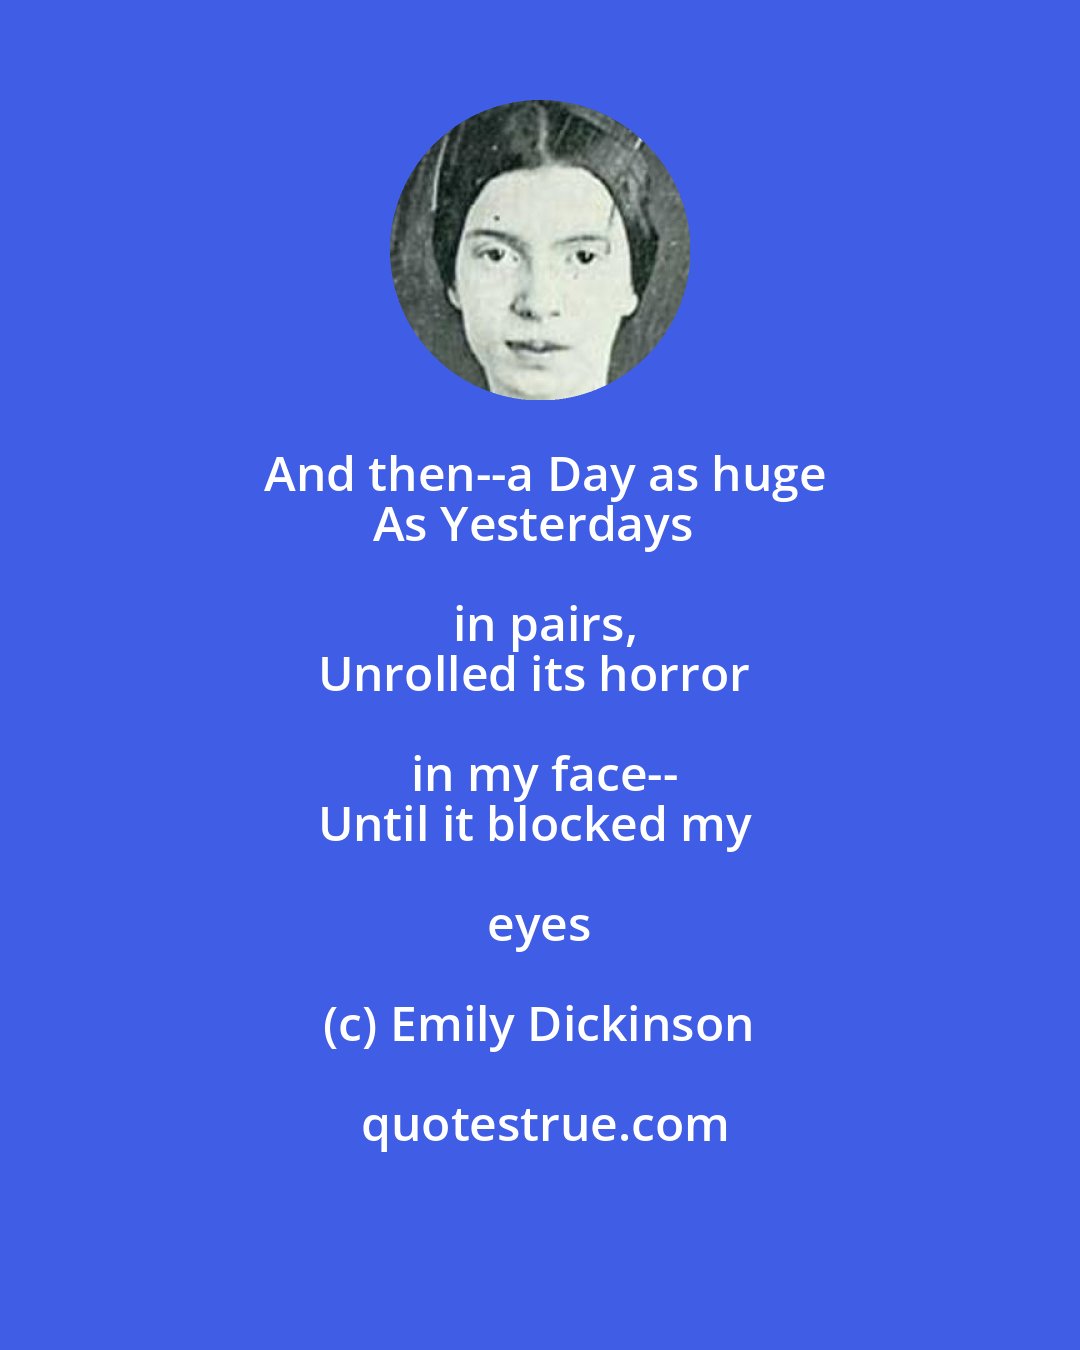 Emily Dickinson: And then--a Day as huge
As Yesterdays in pairs,
Unrolled its horror in my face--
Until it blocked my eyes